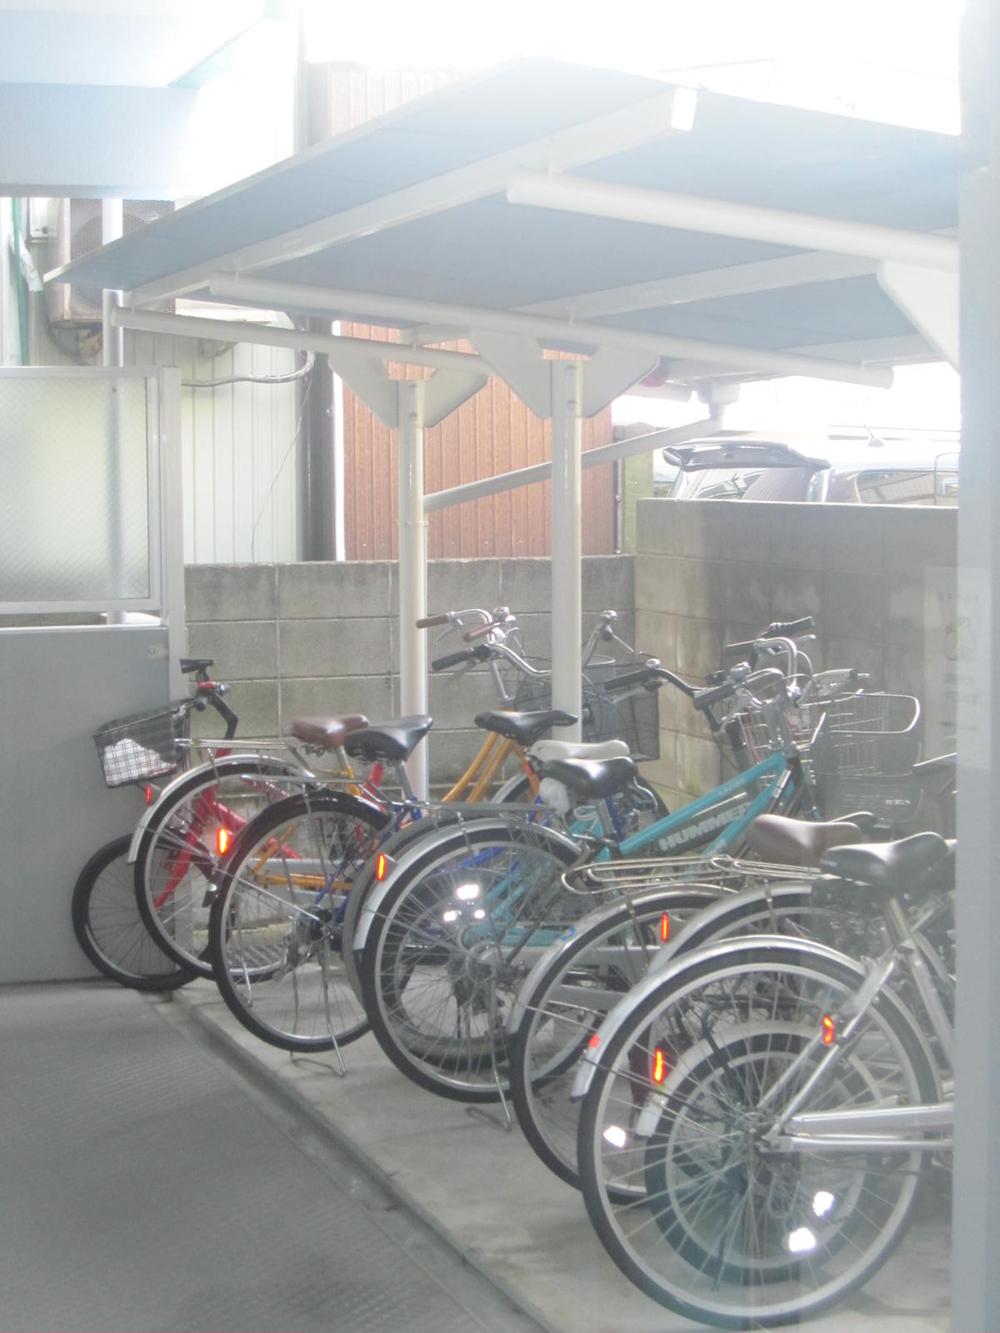 Other common areas. On-site bicycle parking lot.